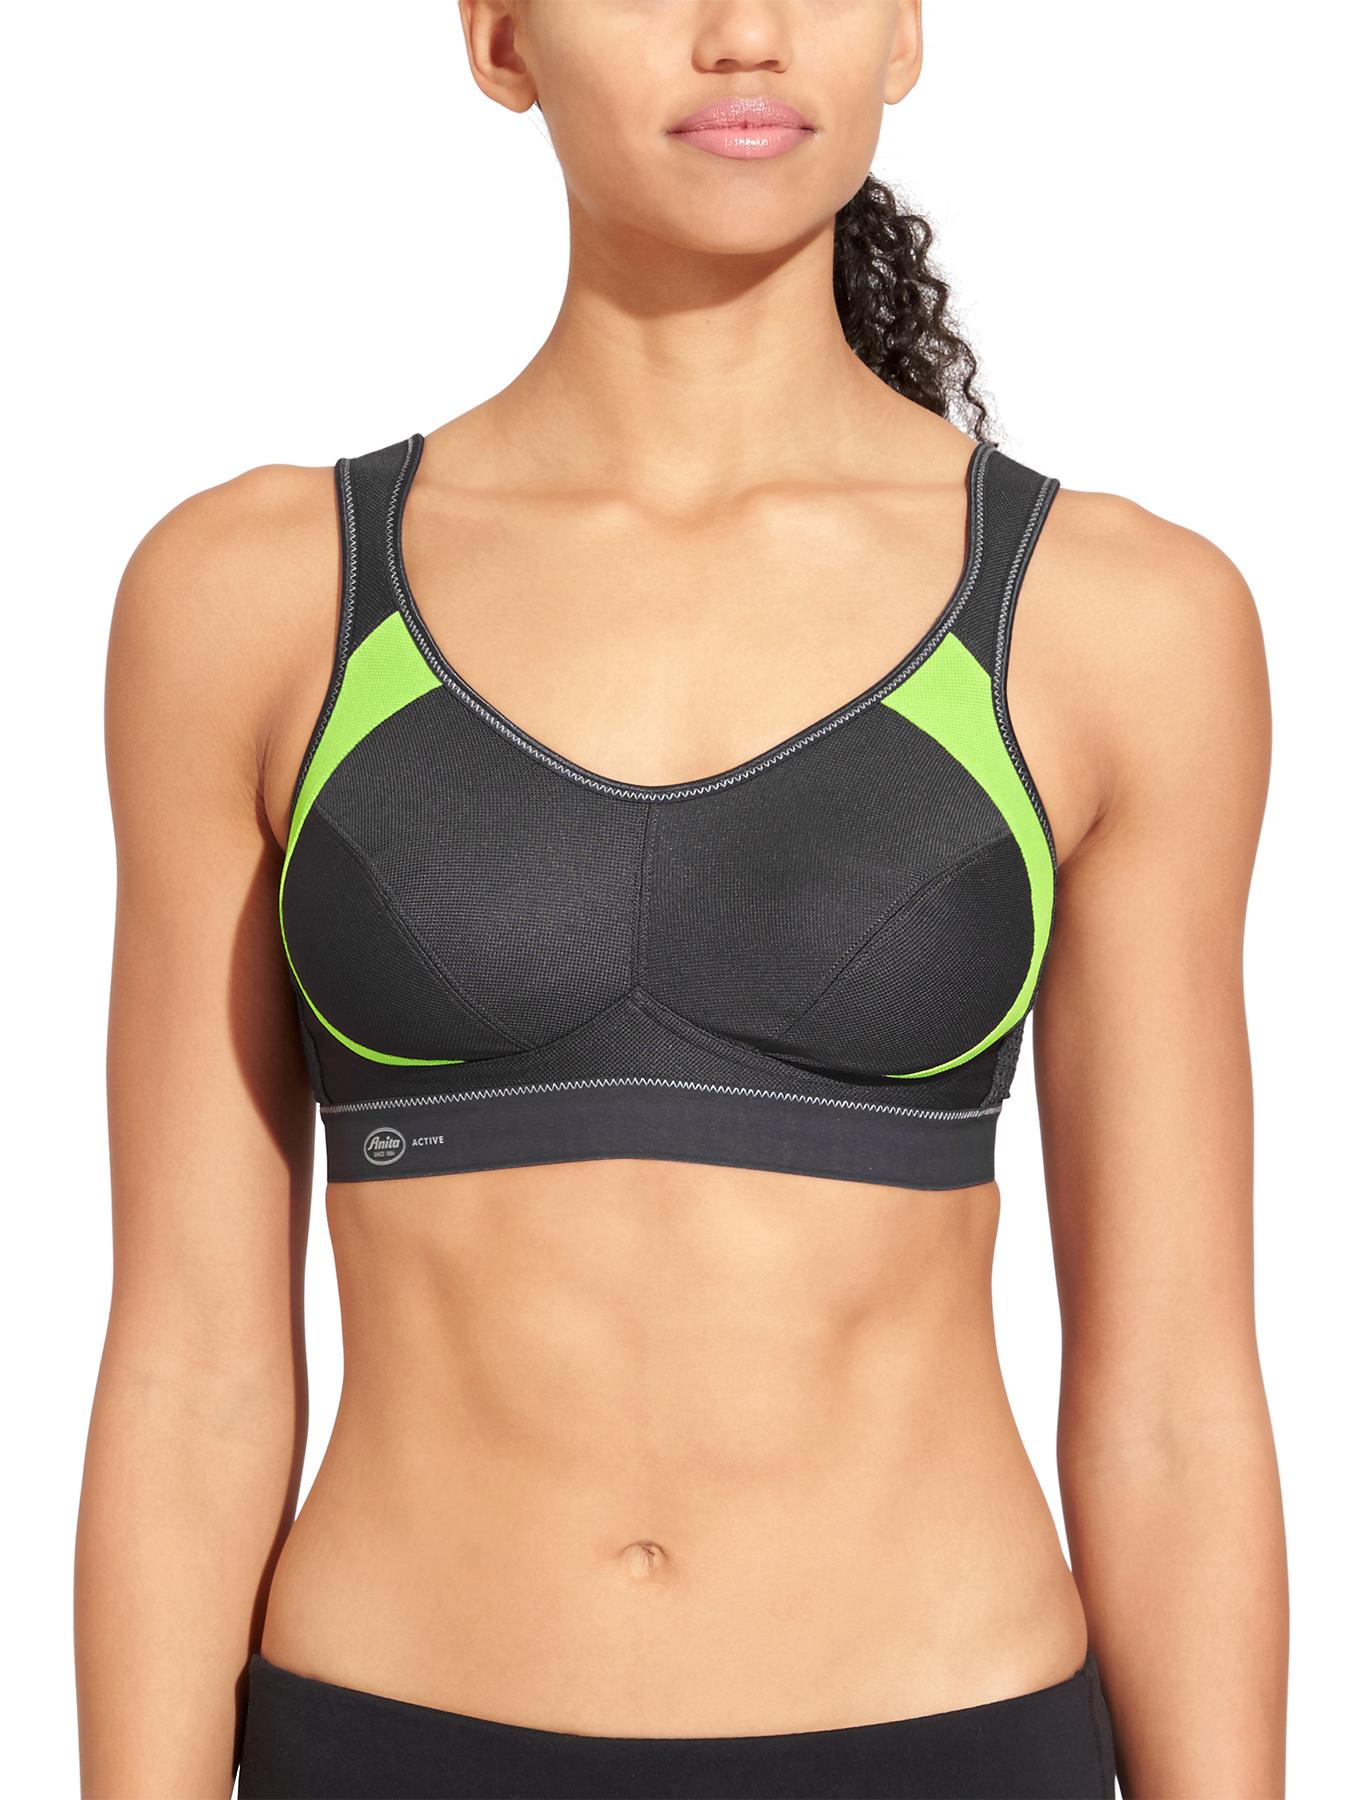 Courage Sports bra, White, Extreme Support with Cool Max Technology